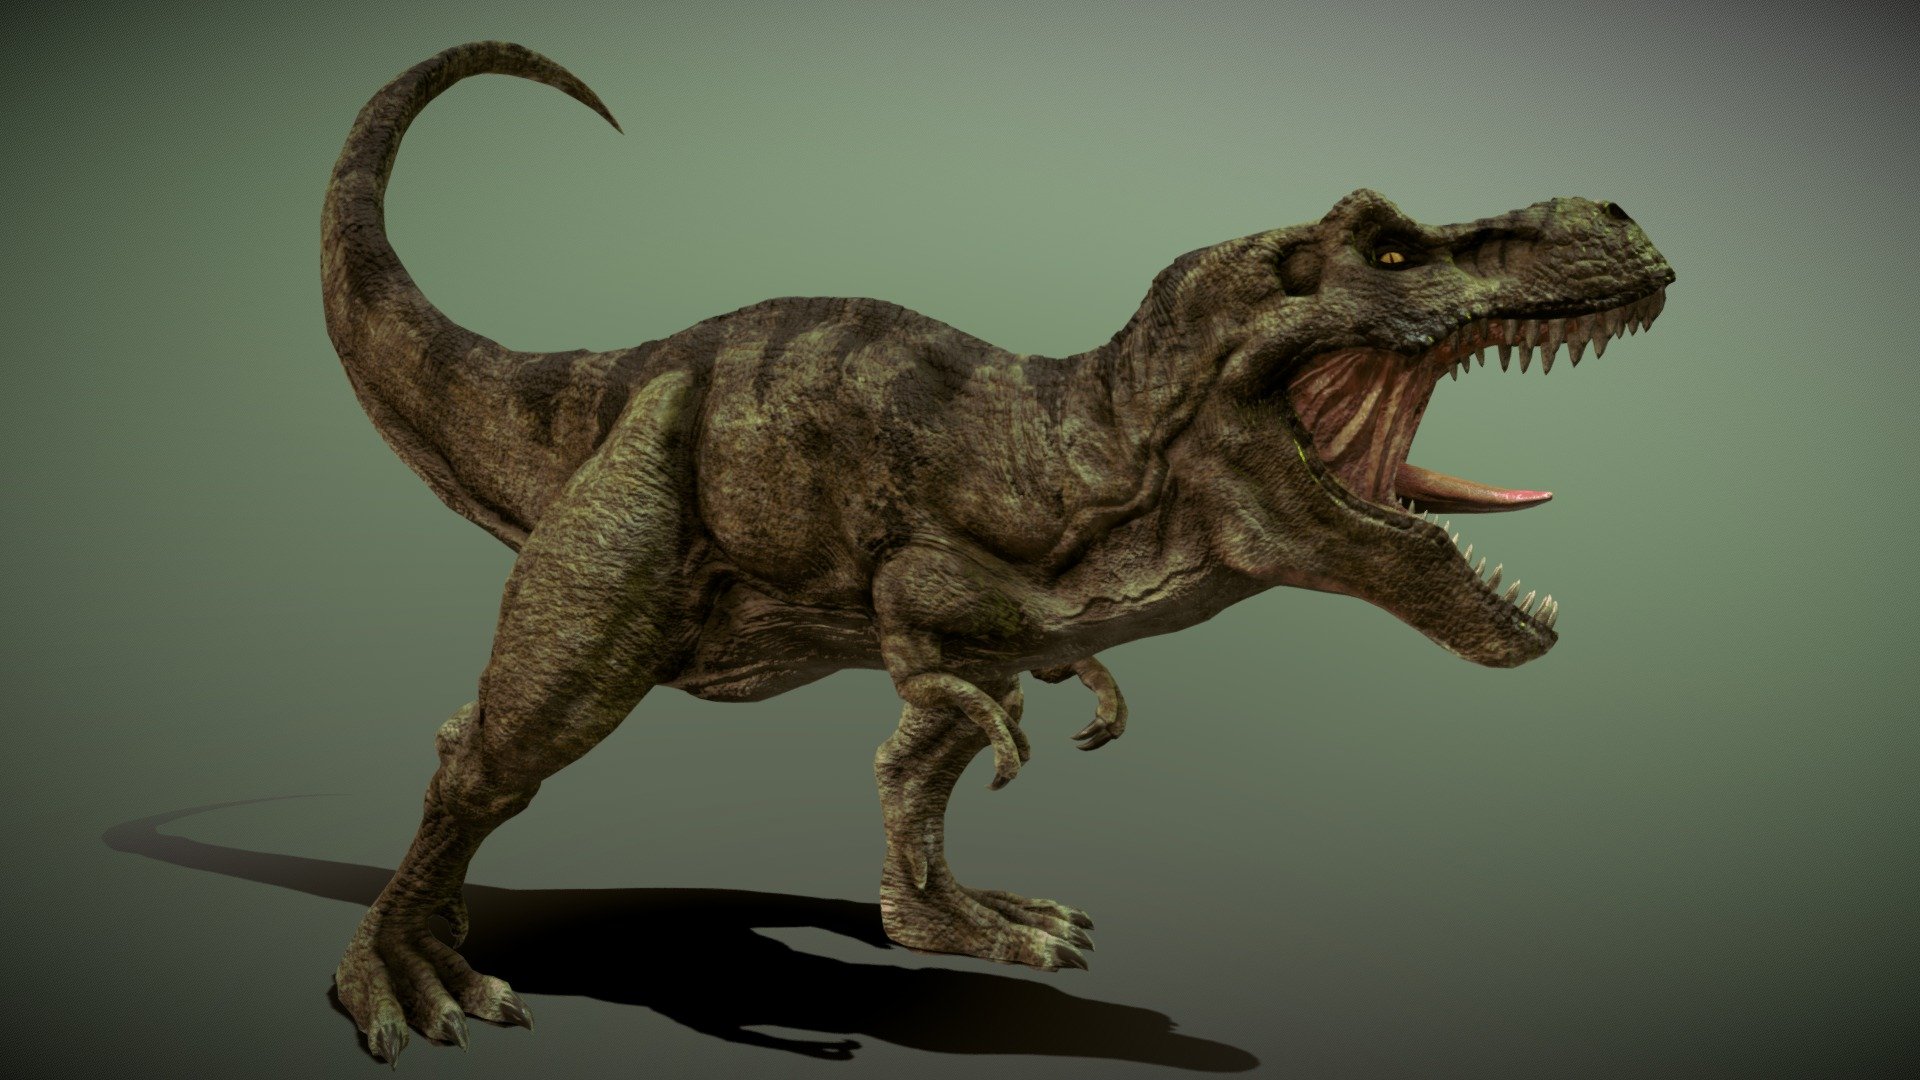 The trex model was made in blender 2.9 and painted in substance painter , when subdivided the model have 85000 verts and when not is 14344 ,it comes with a game intended fbx of 3 LODS,LOD0=14344,LOD1=7772,LOD2=4012,and LOD3=1223

it comes with 4k,2k,1k textures for the trex body and for the OthersTxtures, it comes with Diffuse,Normal,Roughness,AmbientOclussion,and Emissive (just for the Eyes) Maps.

The blend file comes with a multiresolution modifier for the trex of 3 subdivisions,and with a Control Rig ,i also used a addon called Wiggle Bones for the bones in the neck,tail and leg,is used to make that effect of physics to the bones, they are not that really necessary if you want to animate and you can also delete them if you dont want to use the addon, i still did a tutorial on how to use addon,and a guide on how to use the rig,also a timelapse of the walk1anim so i can give you tips on how to use the rig, heres the link https://www.youtube.com/watch?v=eId0Y_r3XvQ  ,anyways thats it ,hope you like it! - Tyrannosaurus Rex - Buy Royalty Free 3D model by GoldenZtuff (@dhjwdwd) 3d model